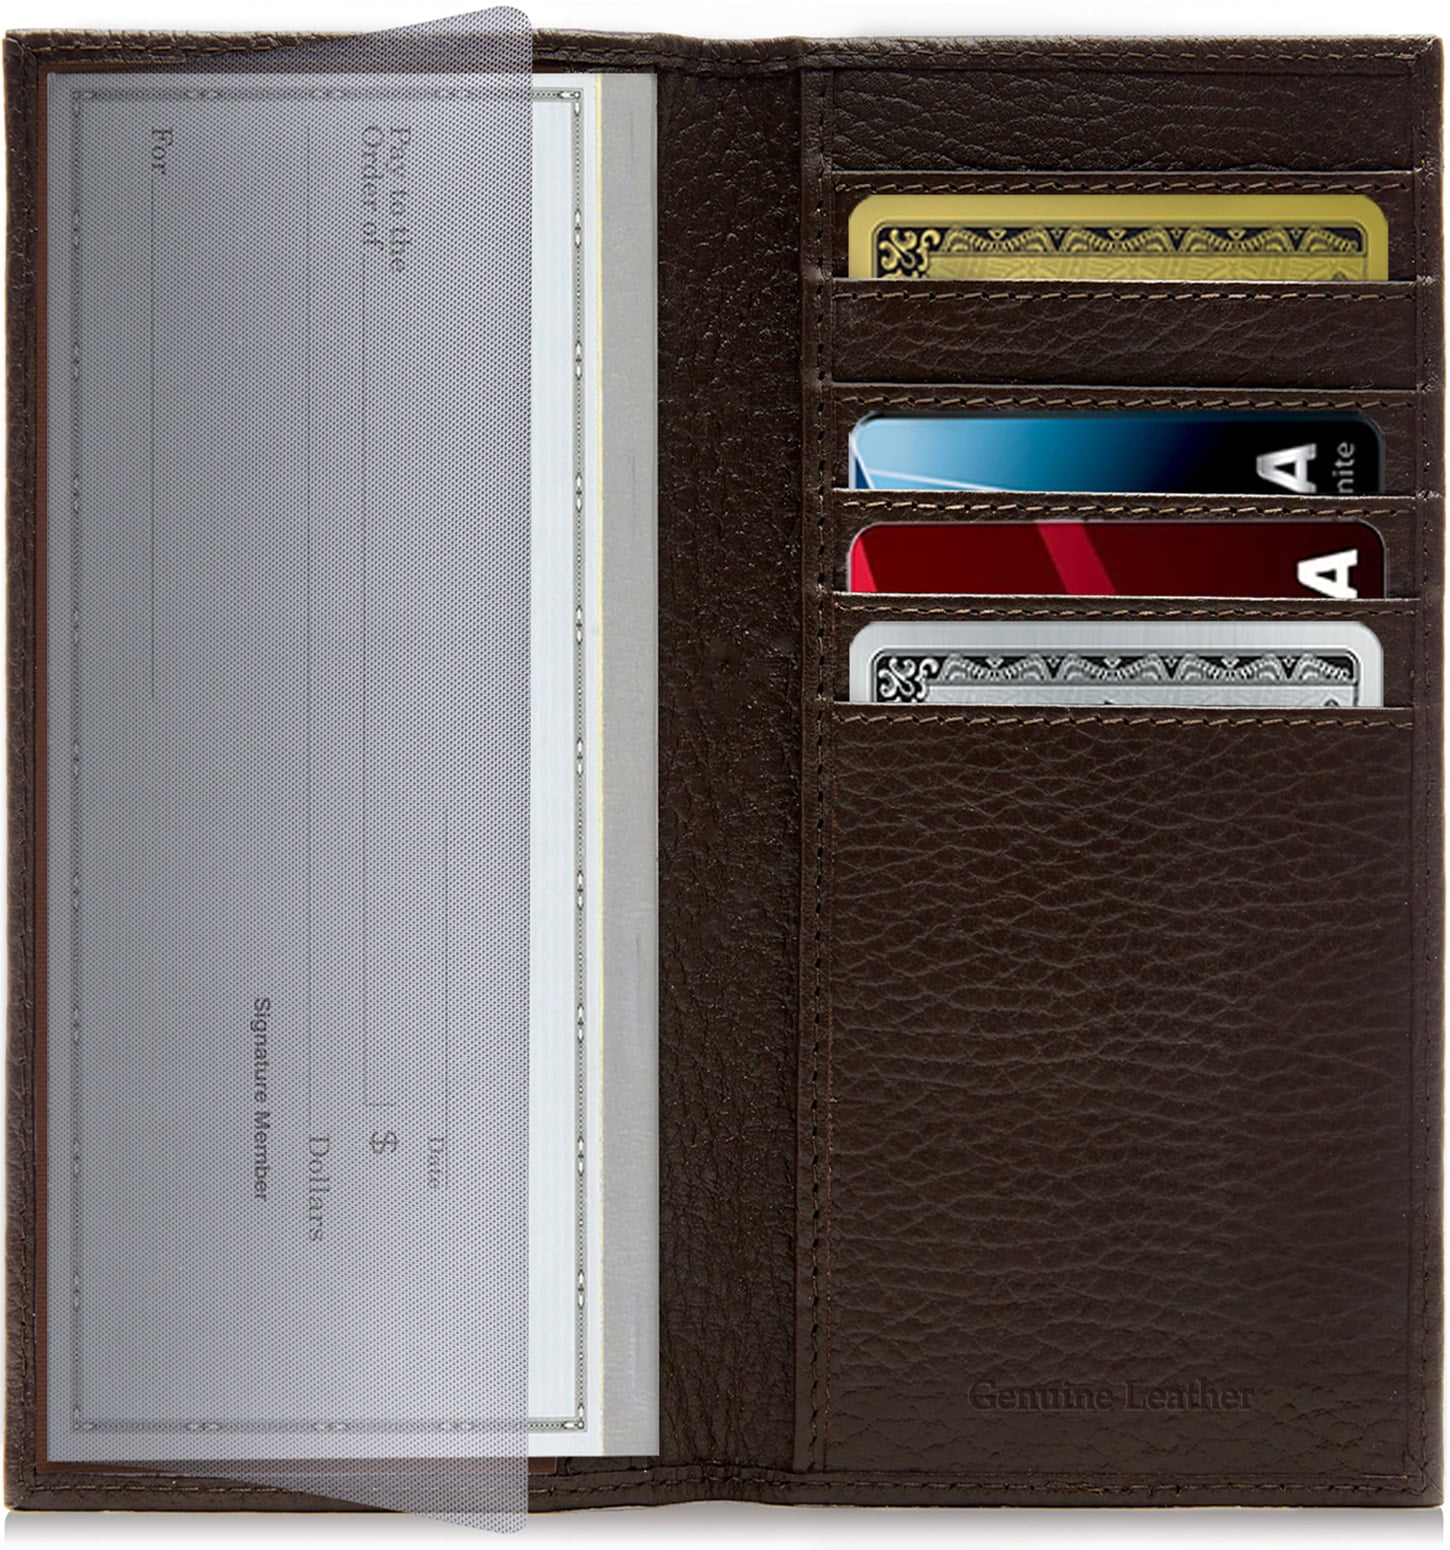 Access Denied - Genuine Leather Checkbook Cover For Men And Women